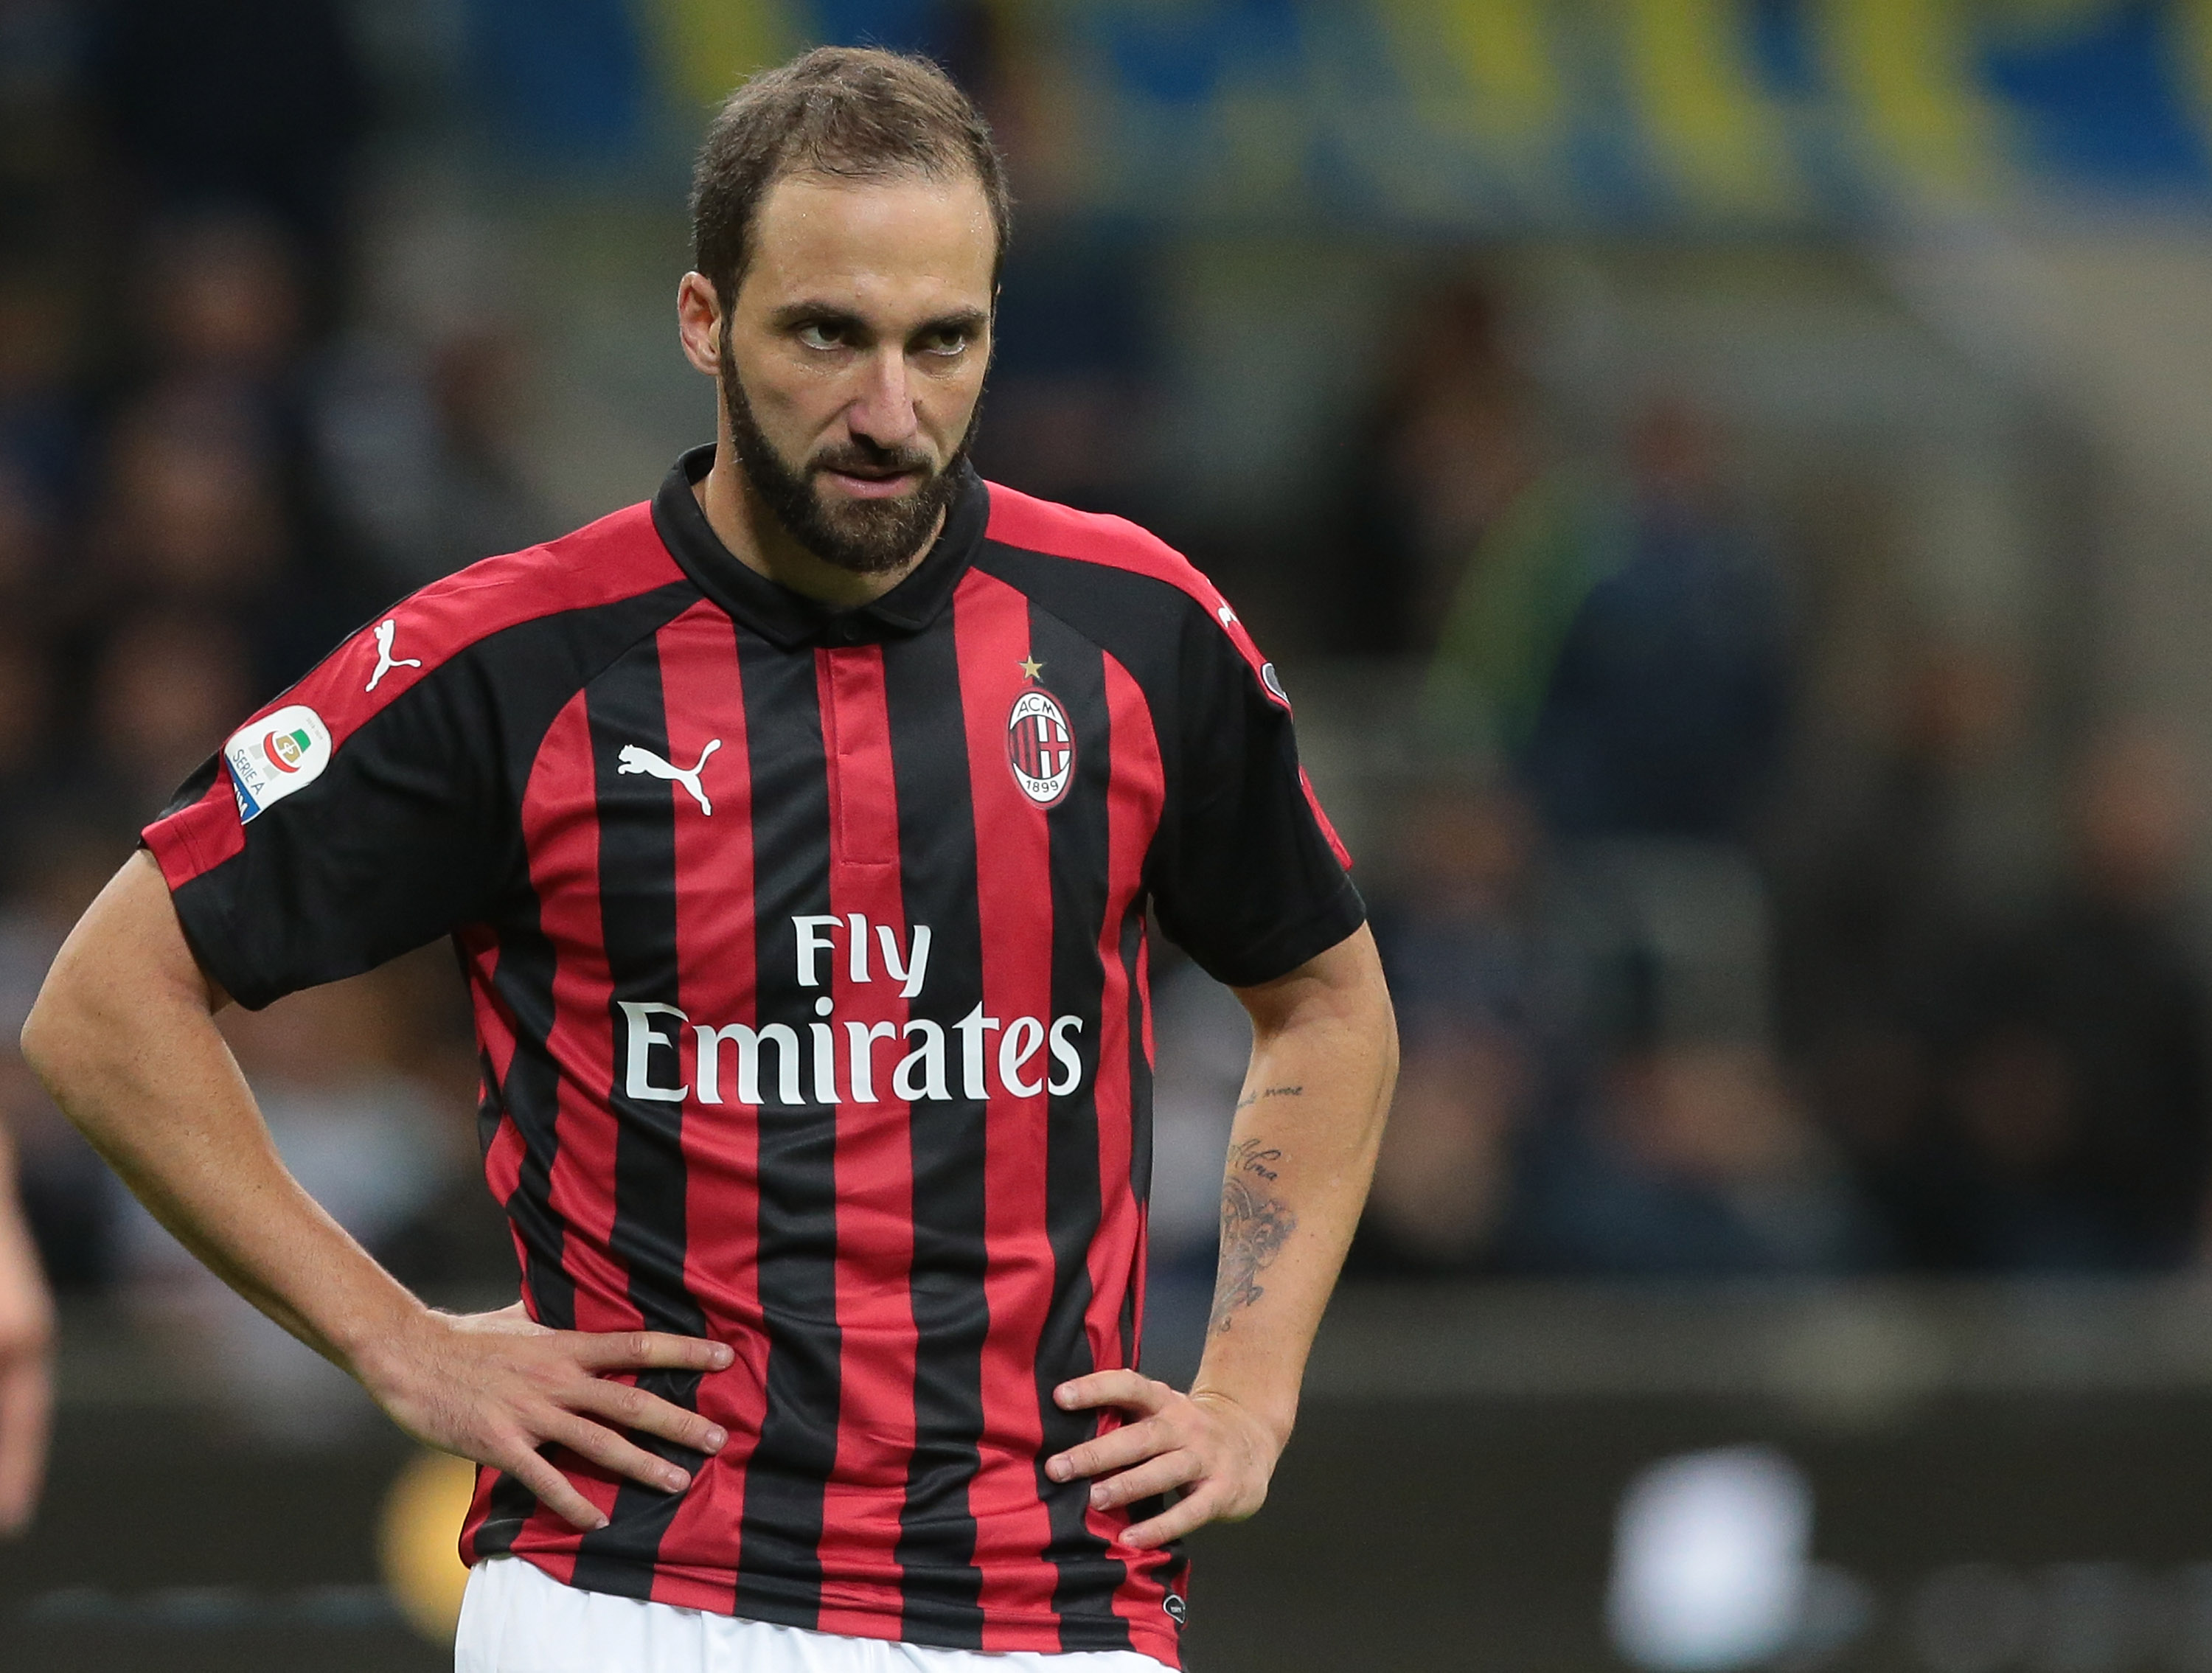 MILAN, ITALY - OCTOBER 21: Gonzalo Higuain of AC Milan shows his dejection during the Serie A match between FC Internazionale and AC Milan at Stadio Giuseppe Meazza on October 21, 2018 in Milan, Italy. (Photo by Emilio Andreoli/Getty Images)